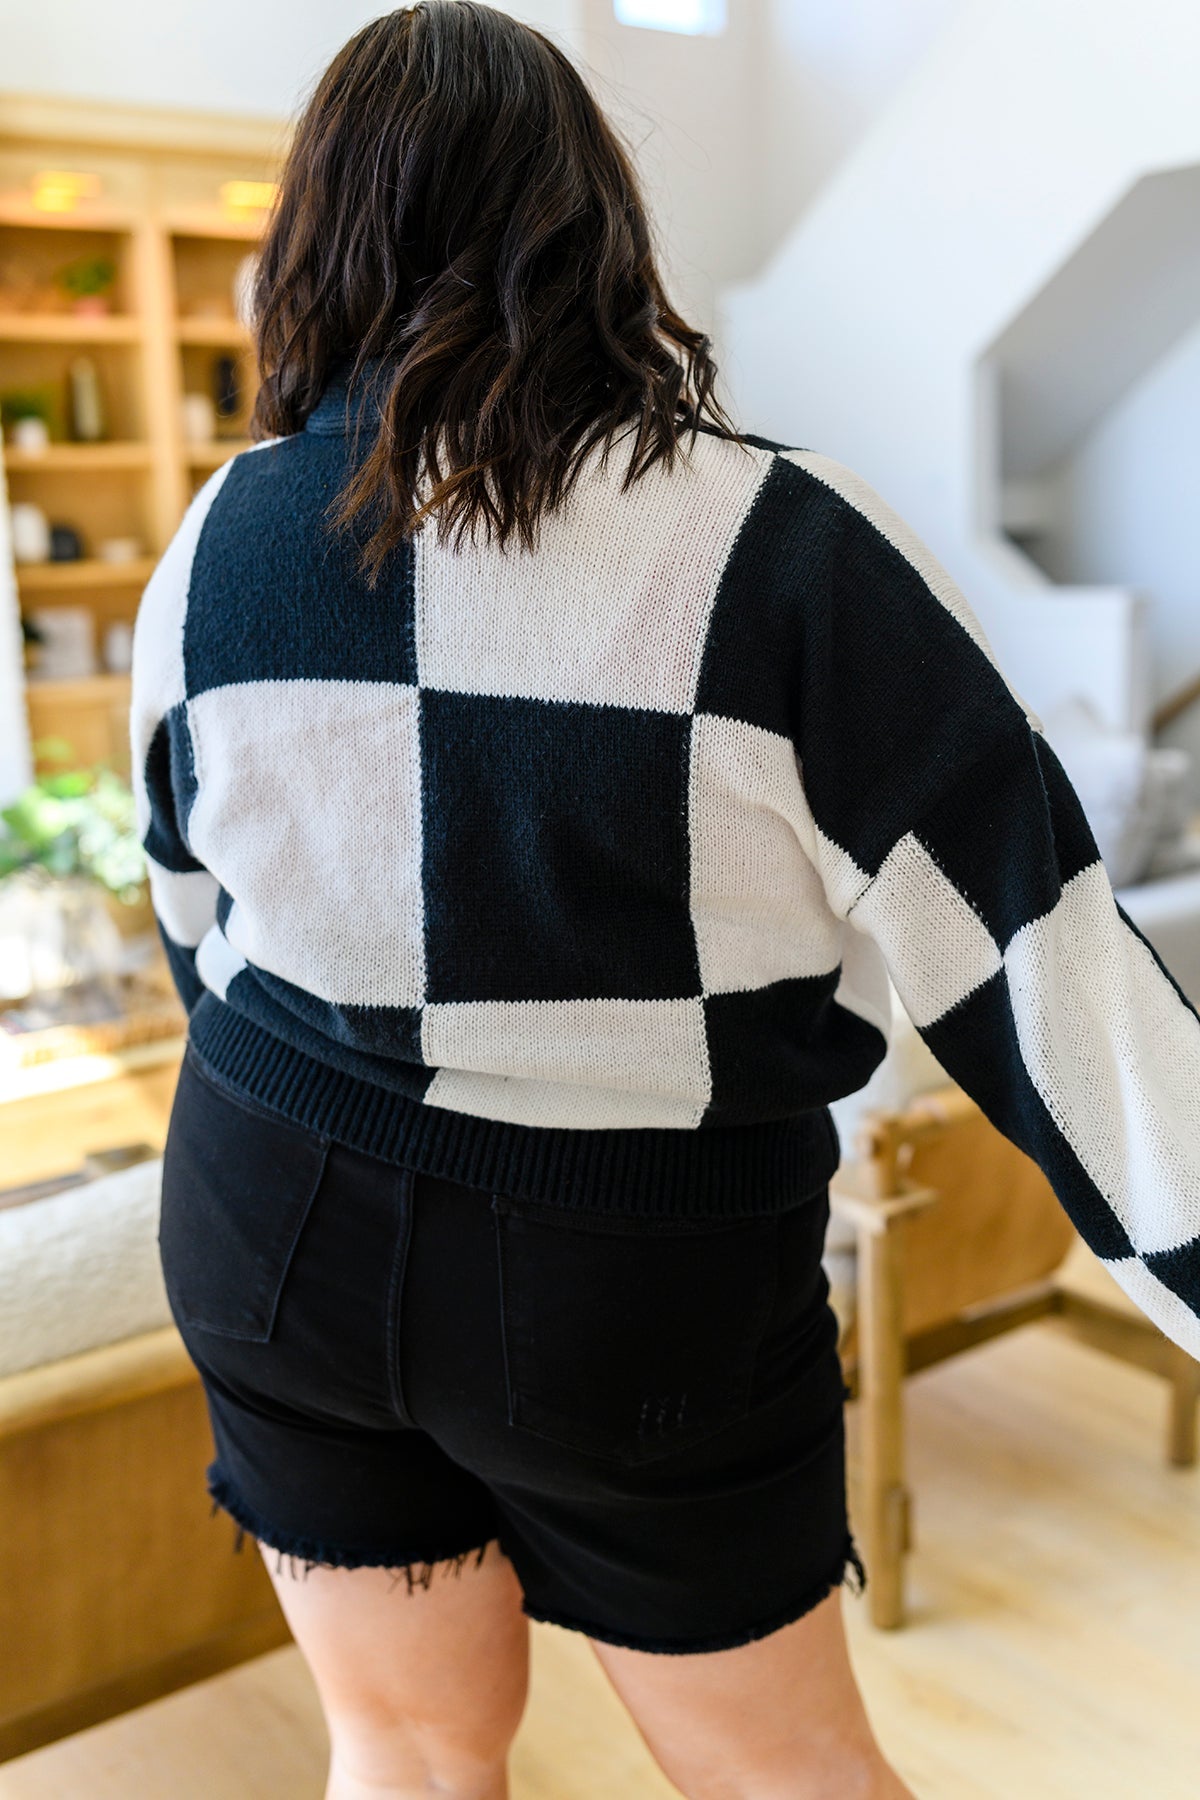 Lola Checkered Cardigan in Black & White (Online Exclusive)